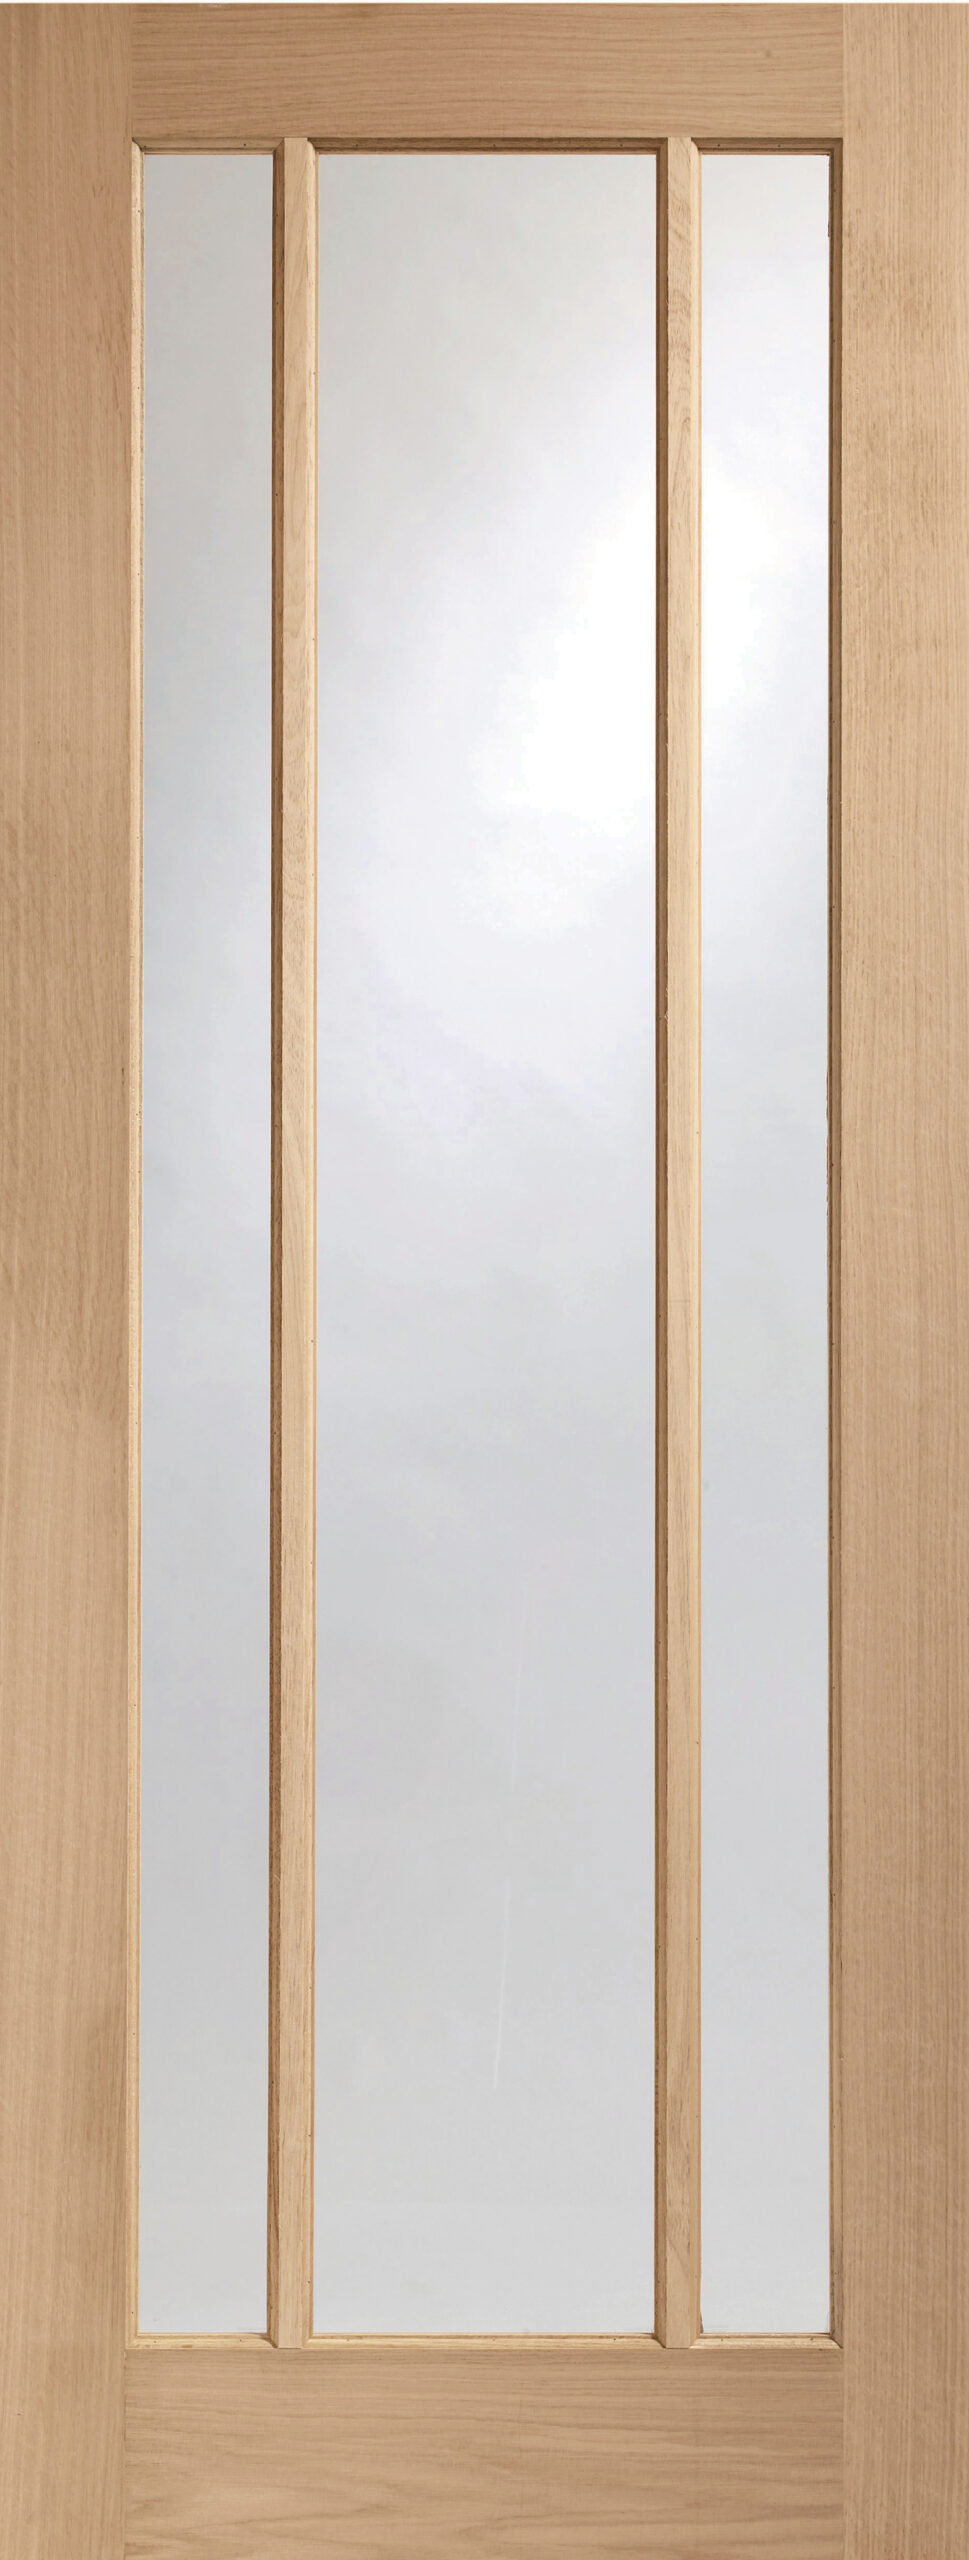 Worcester Pre-Finished Internal Oak Door with Clear Glass – Pre-Finished, 1981 x 762 x 35 mm